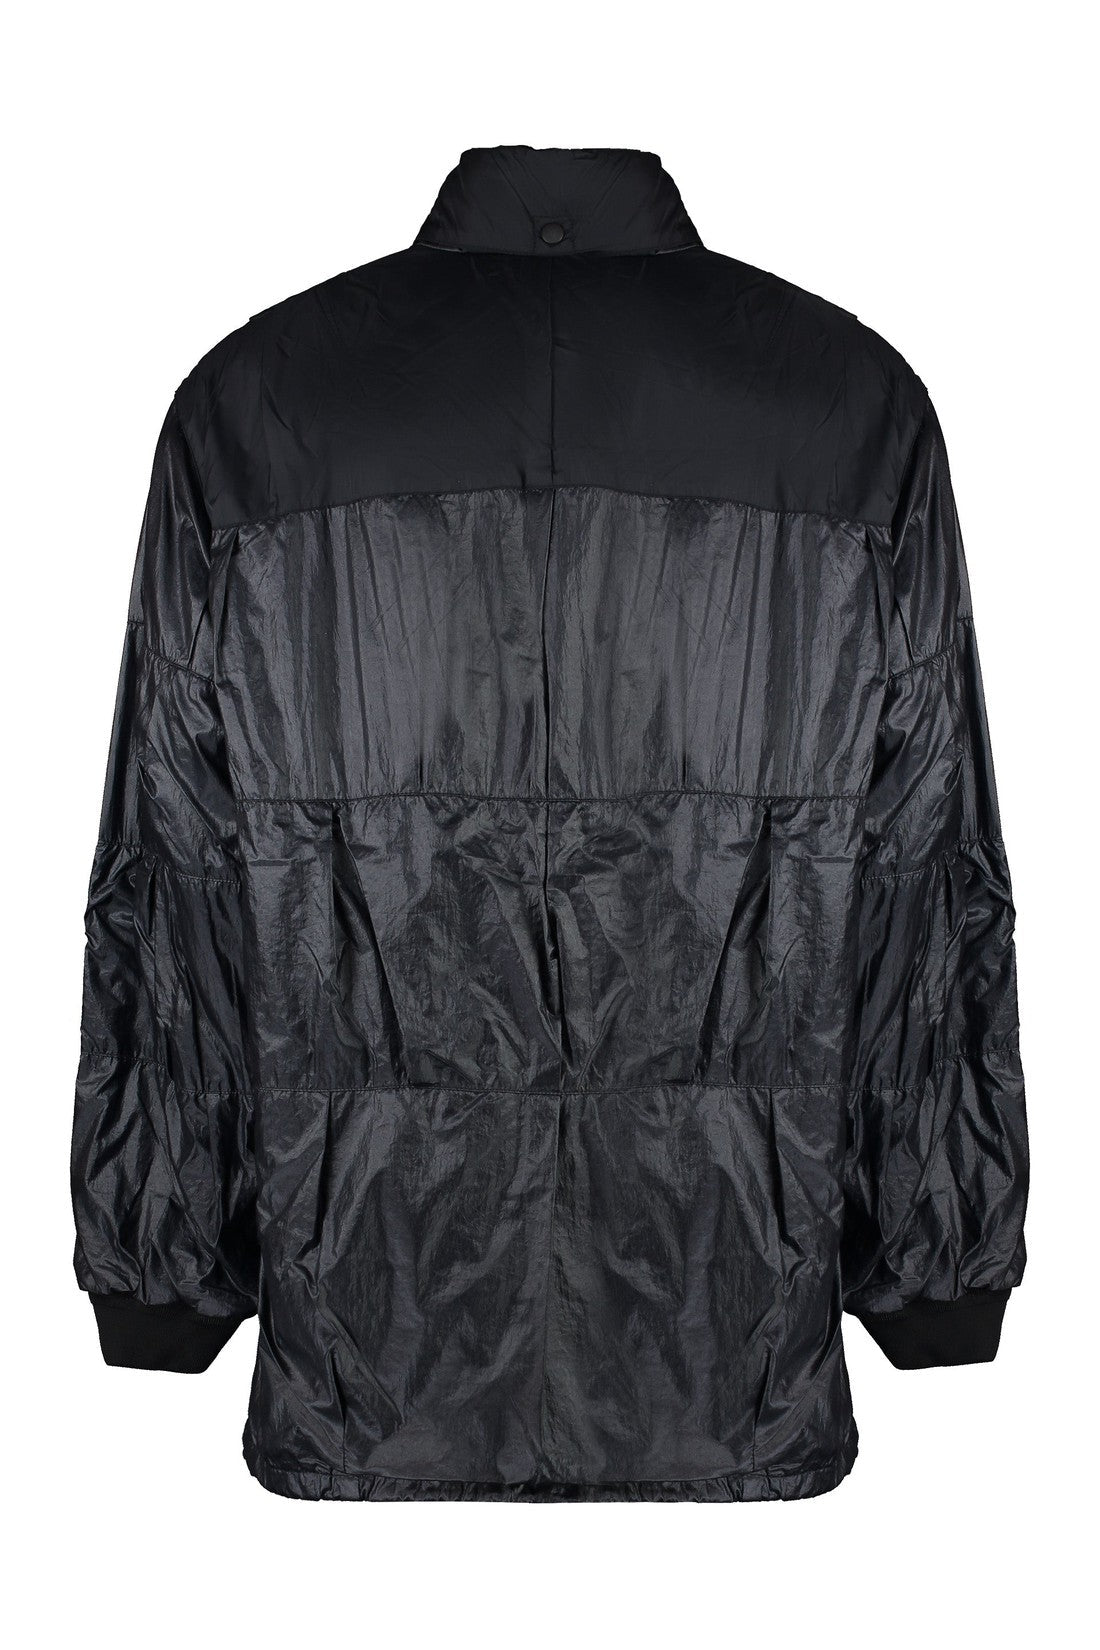 Our Legacy-OUTLET-SALE-Exhaust Puffa Techno fabric jacket-ARCHIVIST